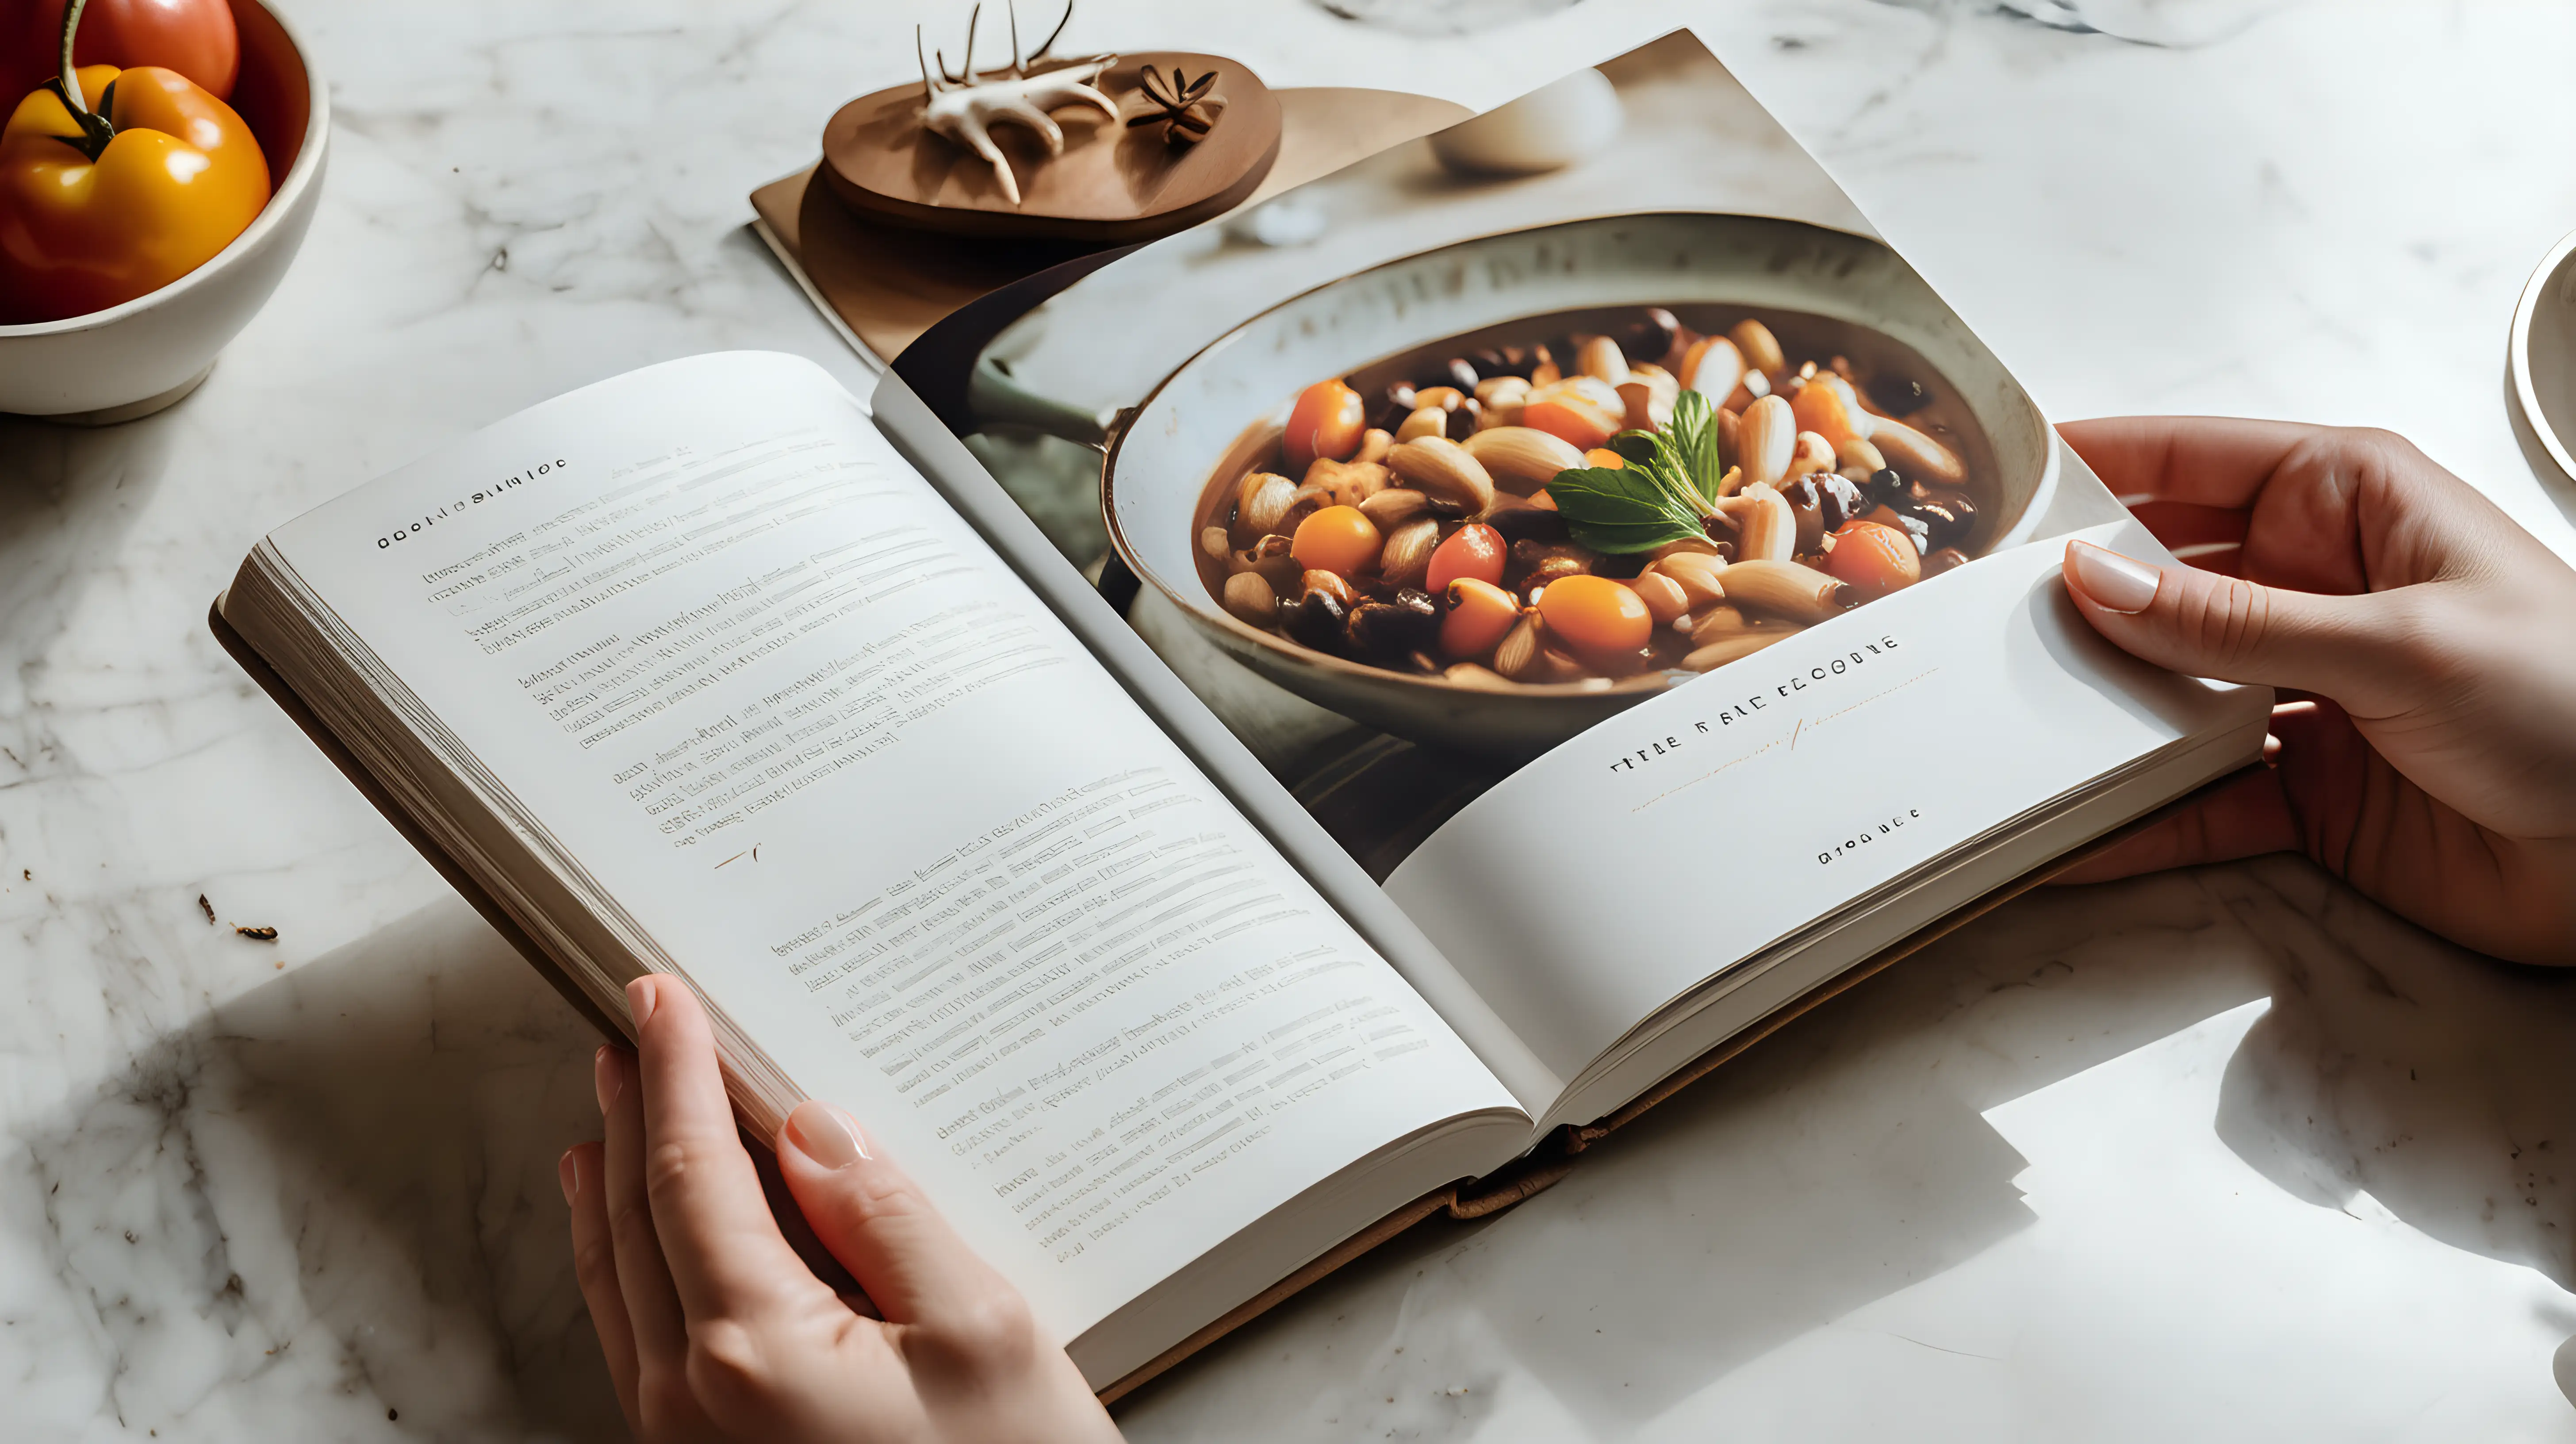 Culinary Inspiration Hands Holding Cookbook with Delicious Recipes